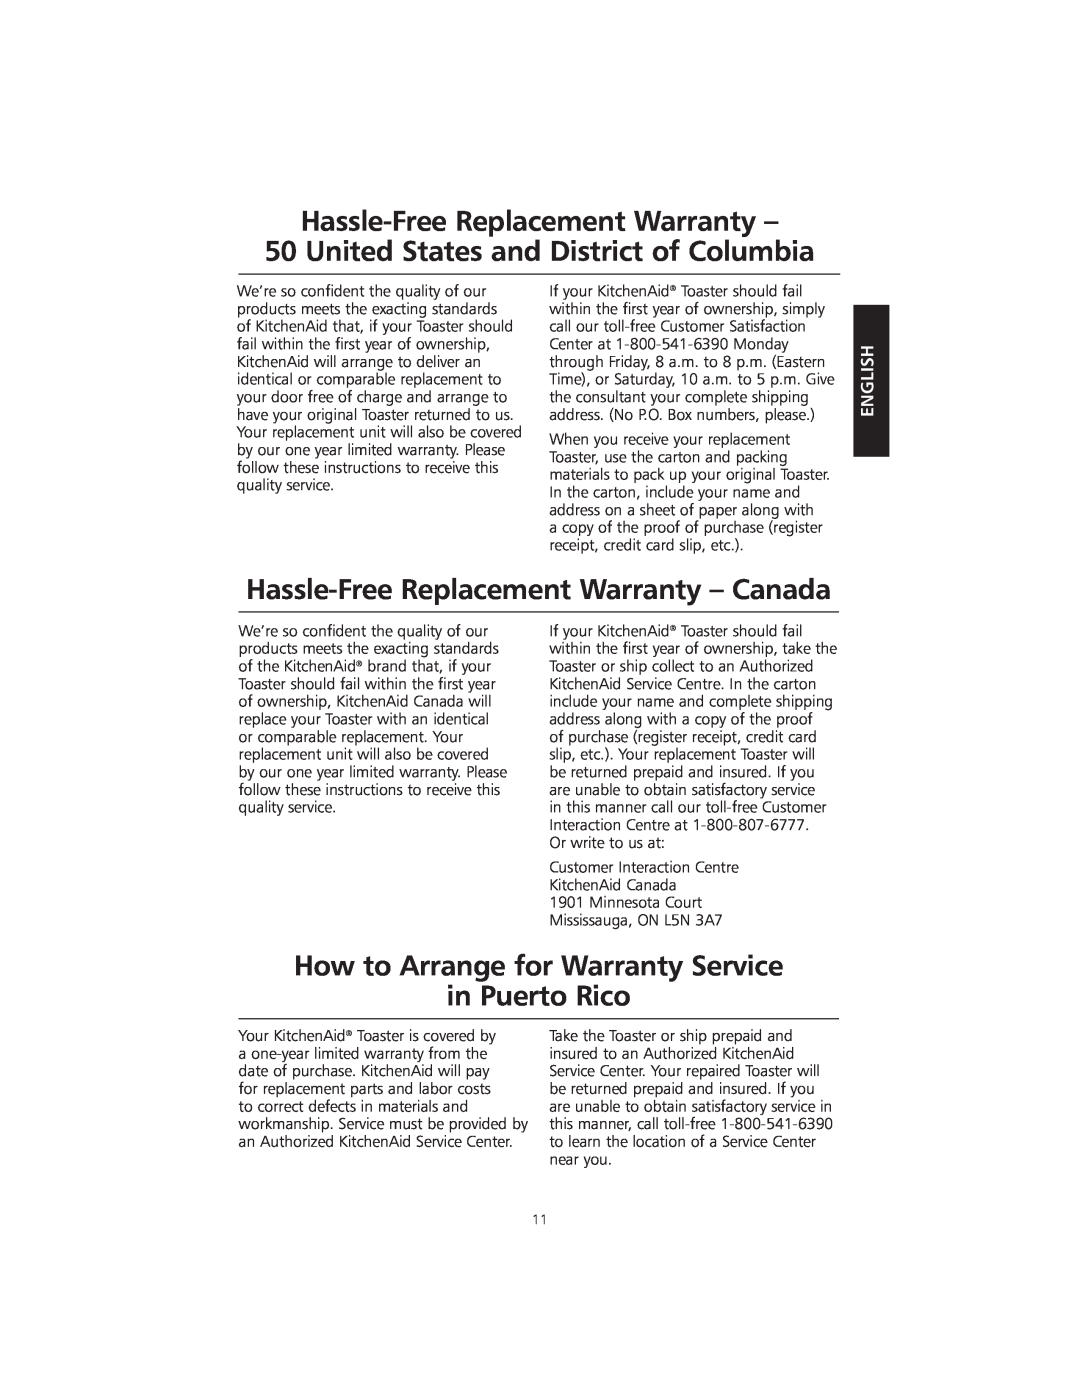 KitchenAid KMTT200 manual Hassle-Free Replacement Warranty, United States and District of Columbia, English 